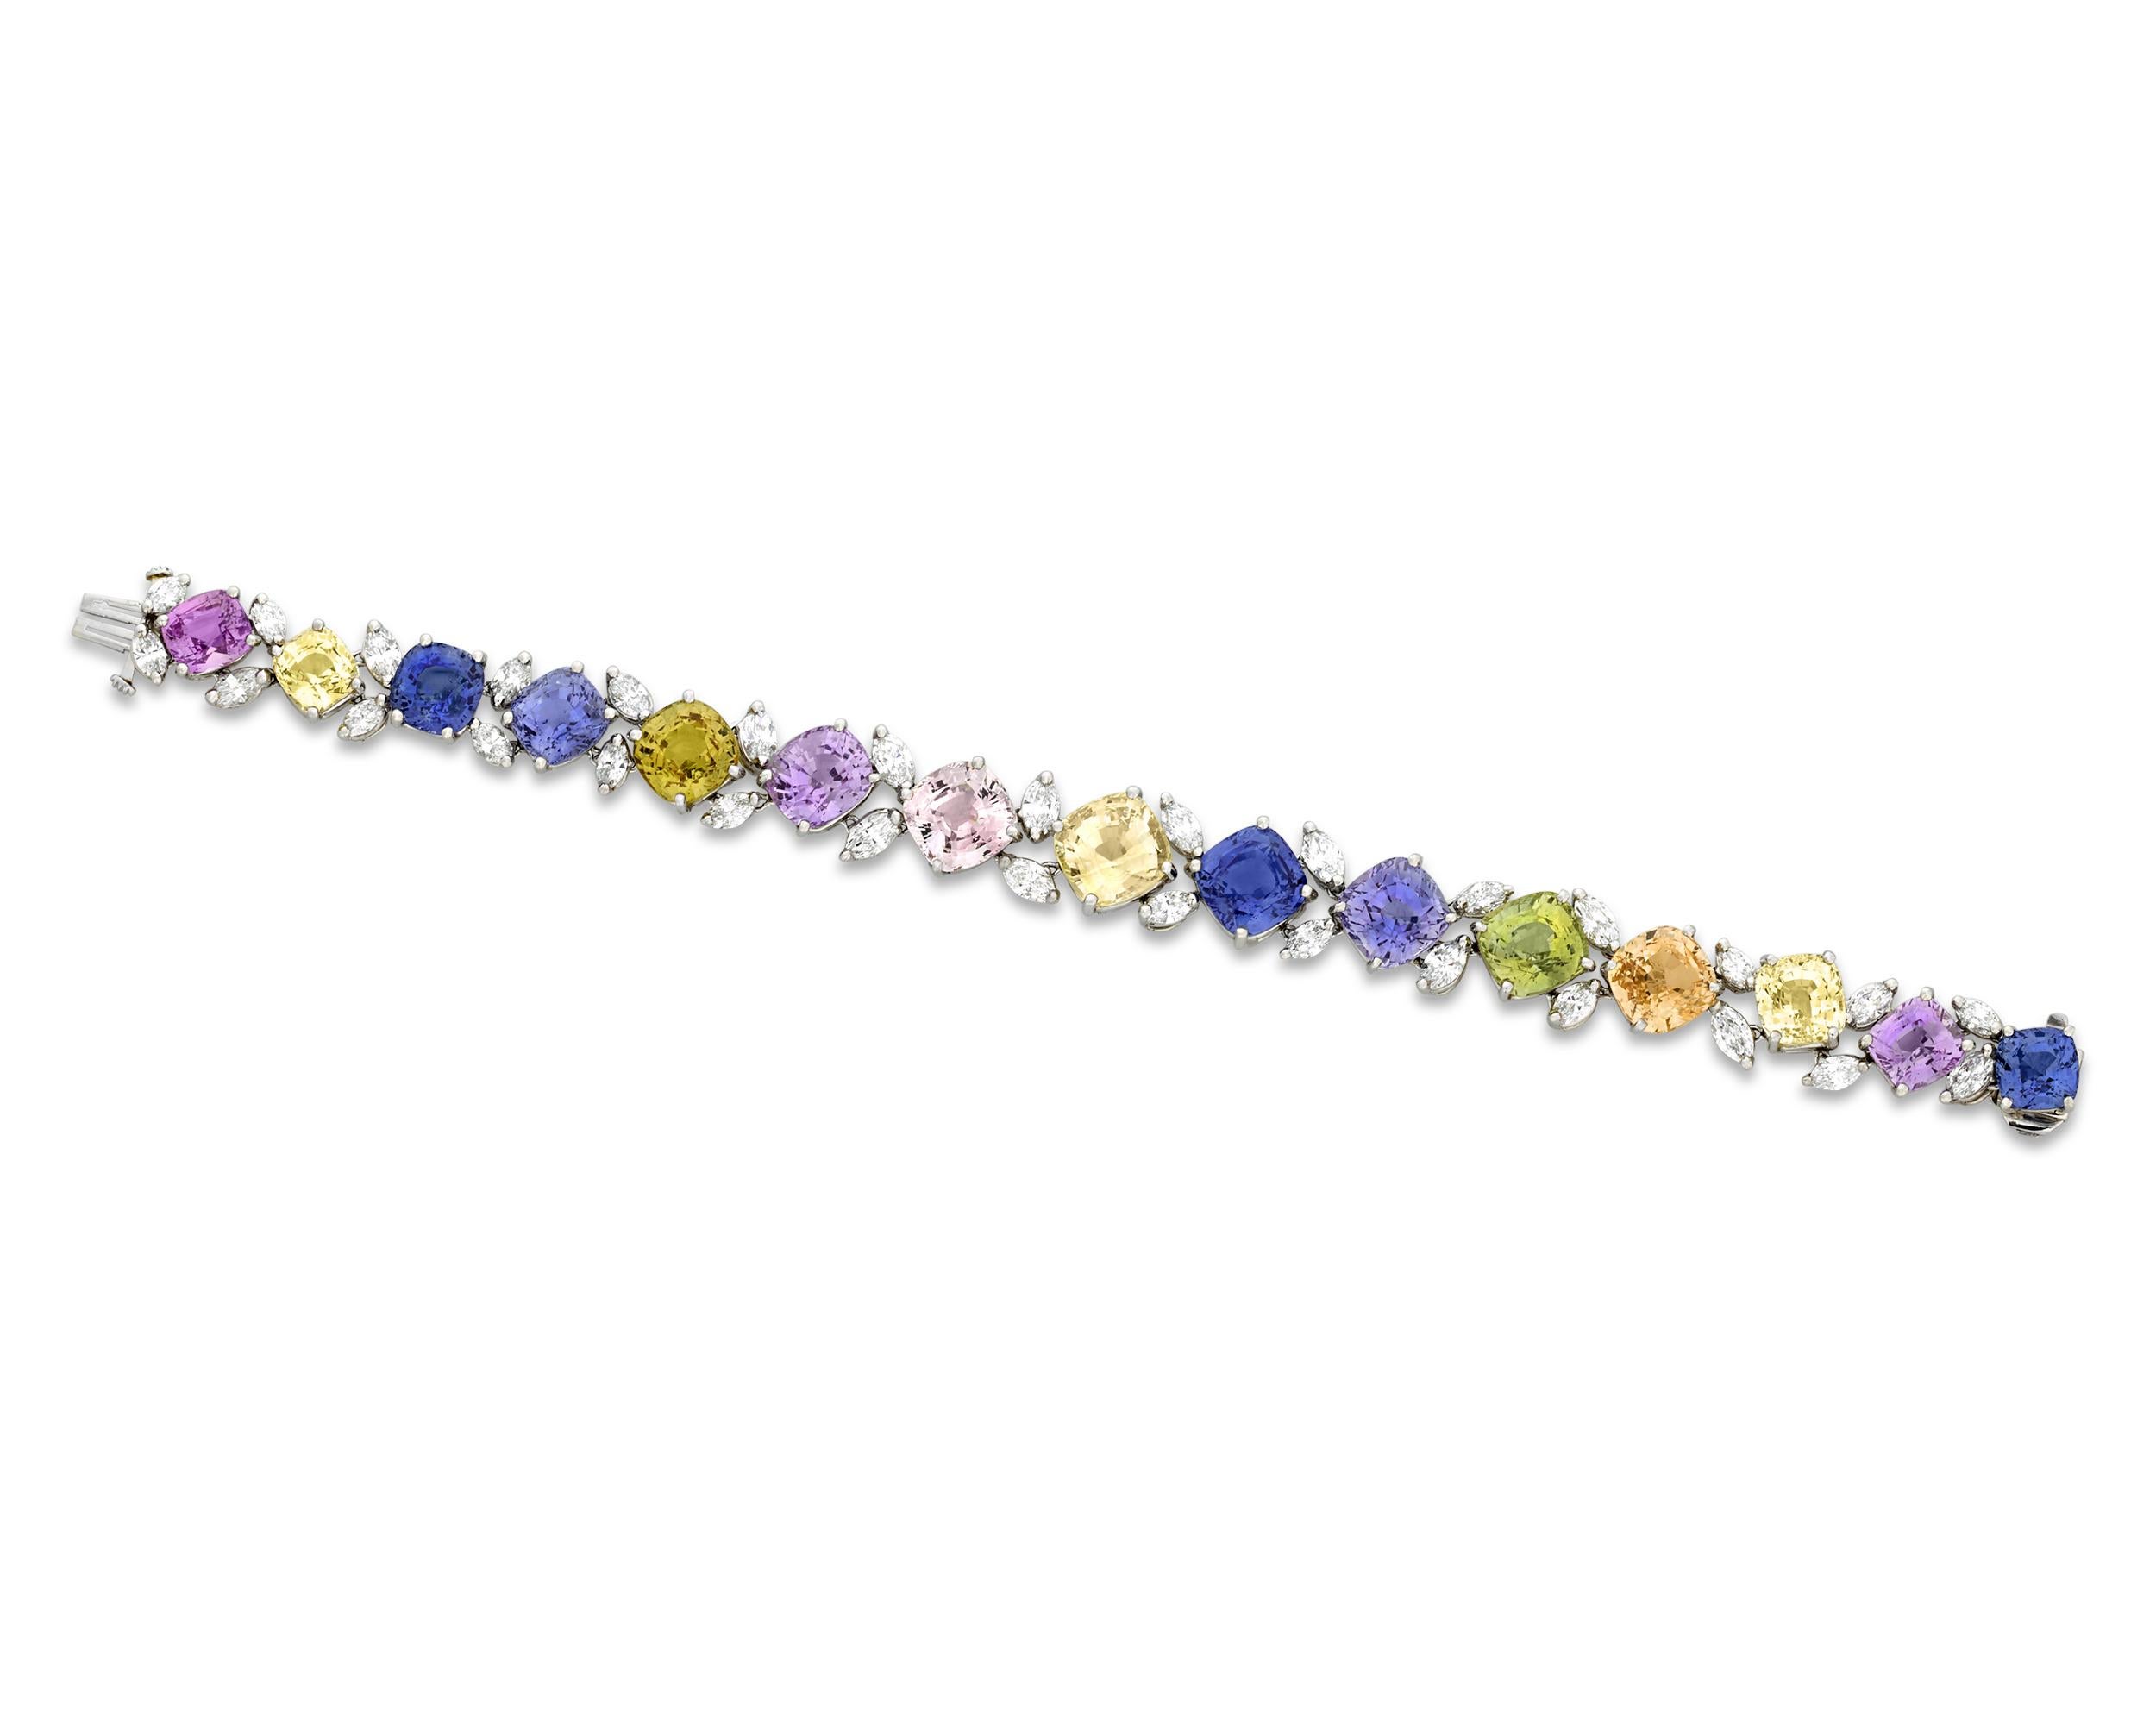 Fifteen stunning cushion-cut sapphires, ranging in color from traditional blue to pink, purple, orange and yellow, present a sparkling rainbow of hues in this bracelet by the celebrated Oscar Heyman. The multi-colored gemstones total an incredible